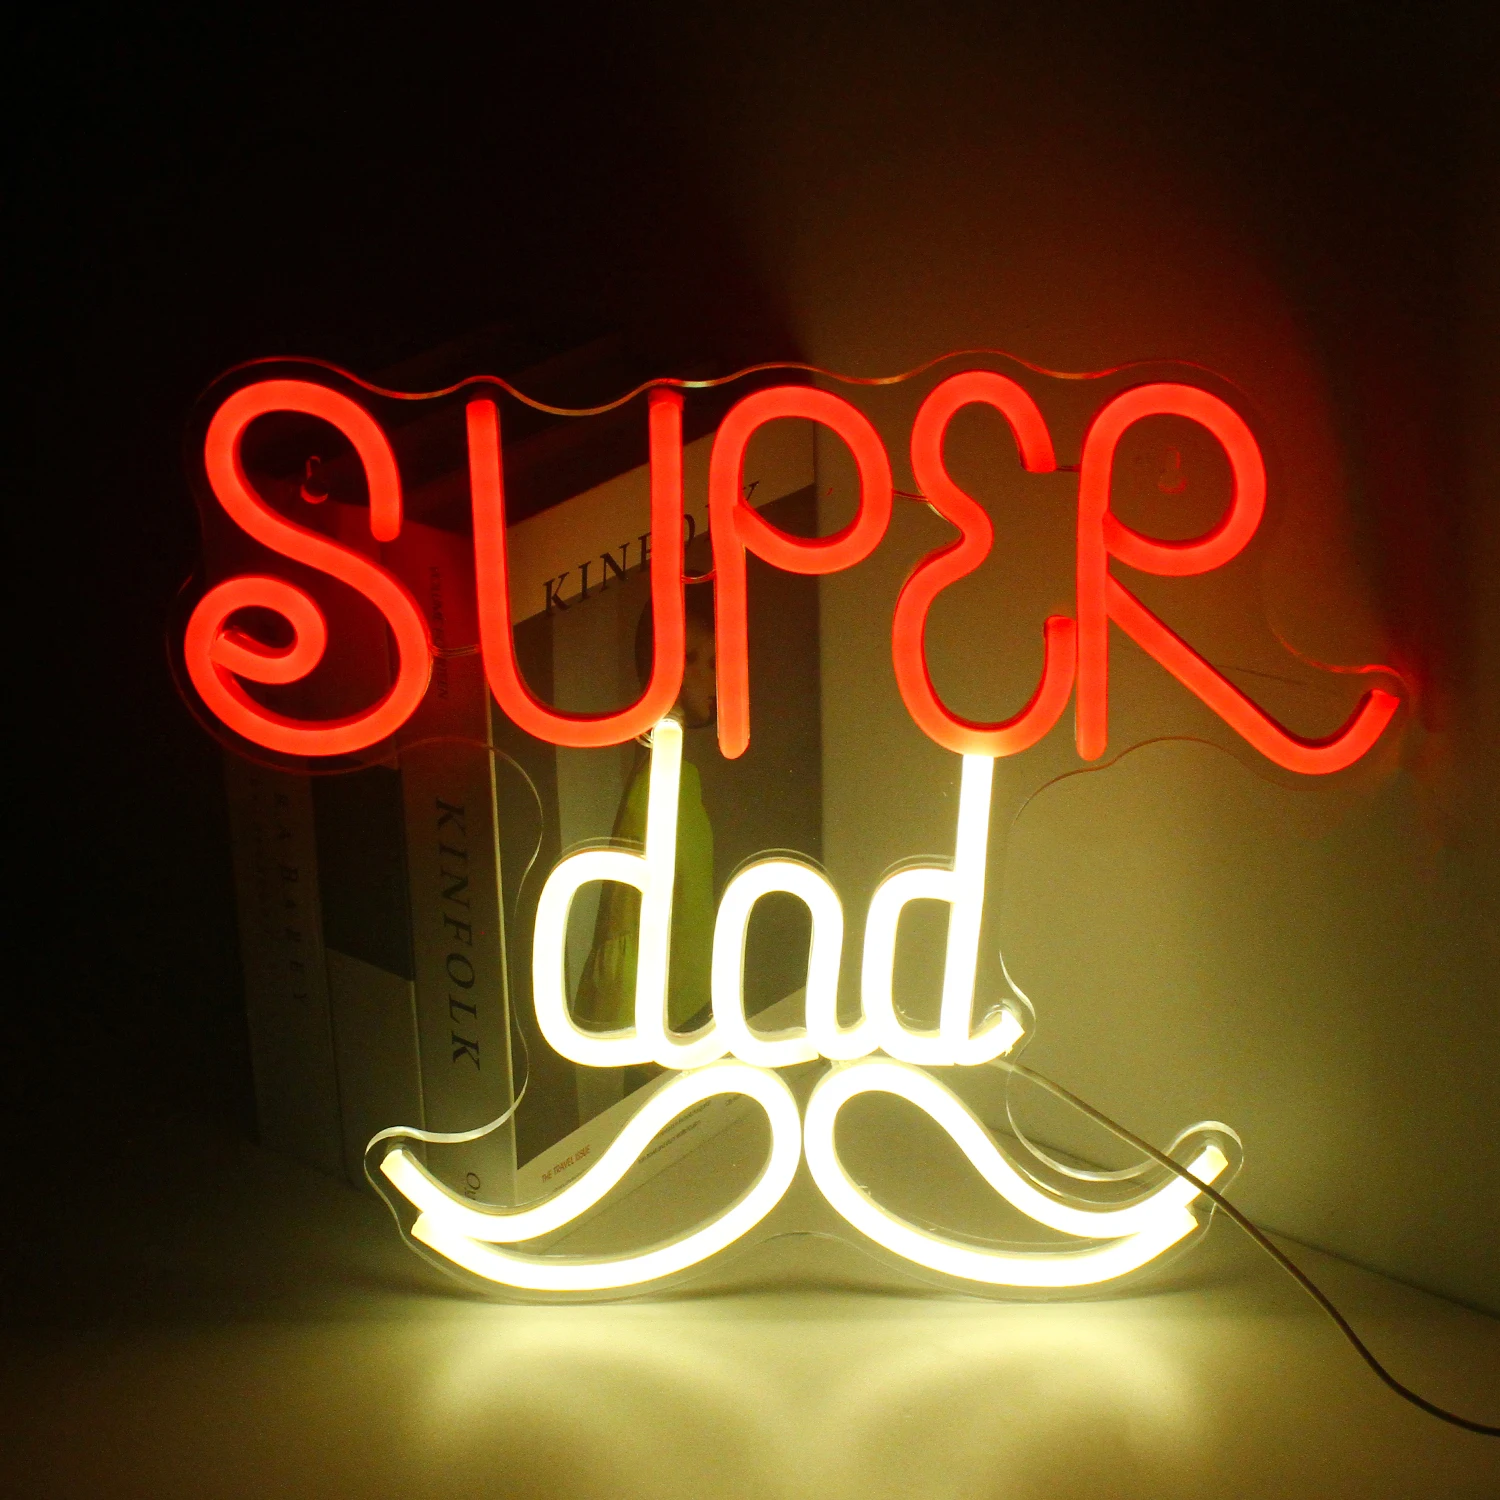 Wanxing Neon Sign Acrylic Super Dad Custom LED Light Ins Home Wall Bar Party Club Shop Aesthetic Room Bedroom Decor Child Gift